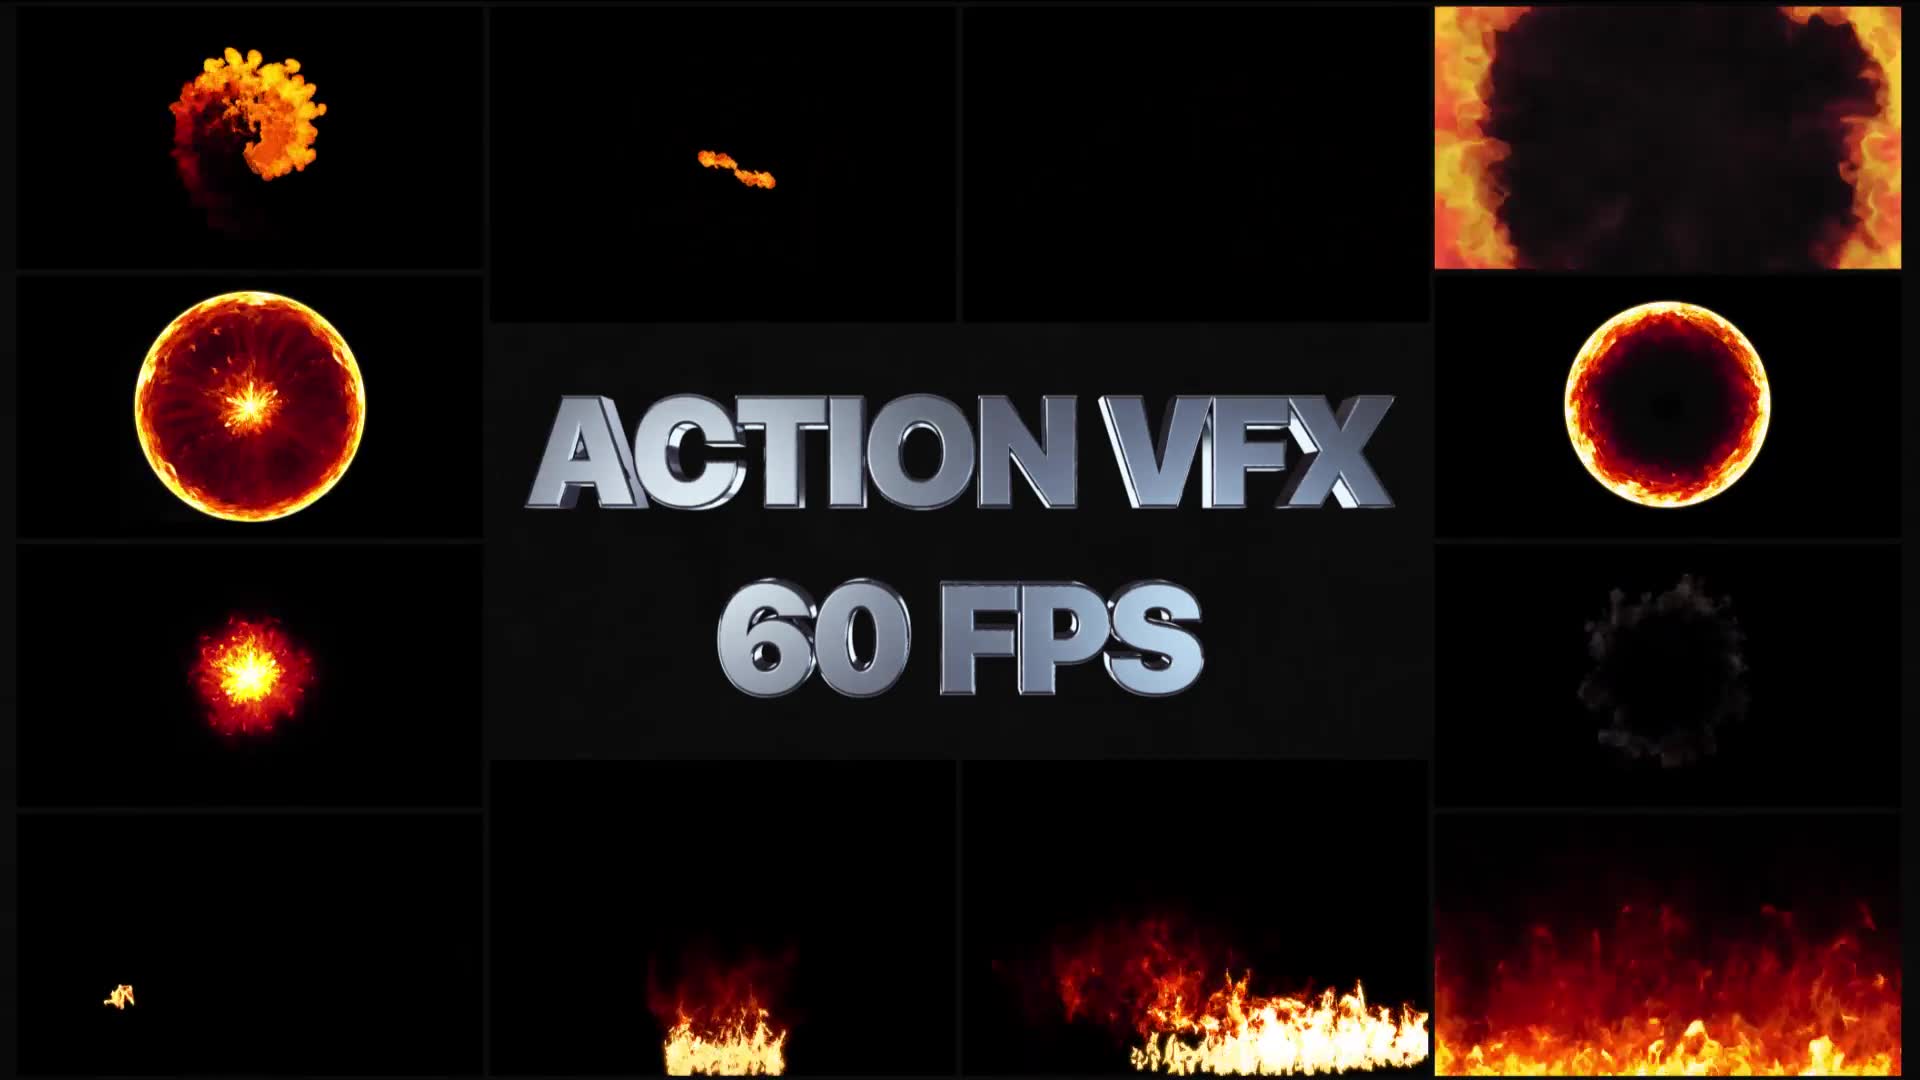 vfx after effects download